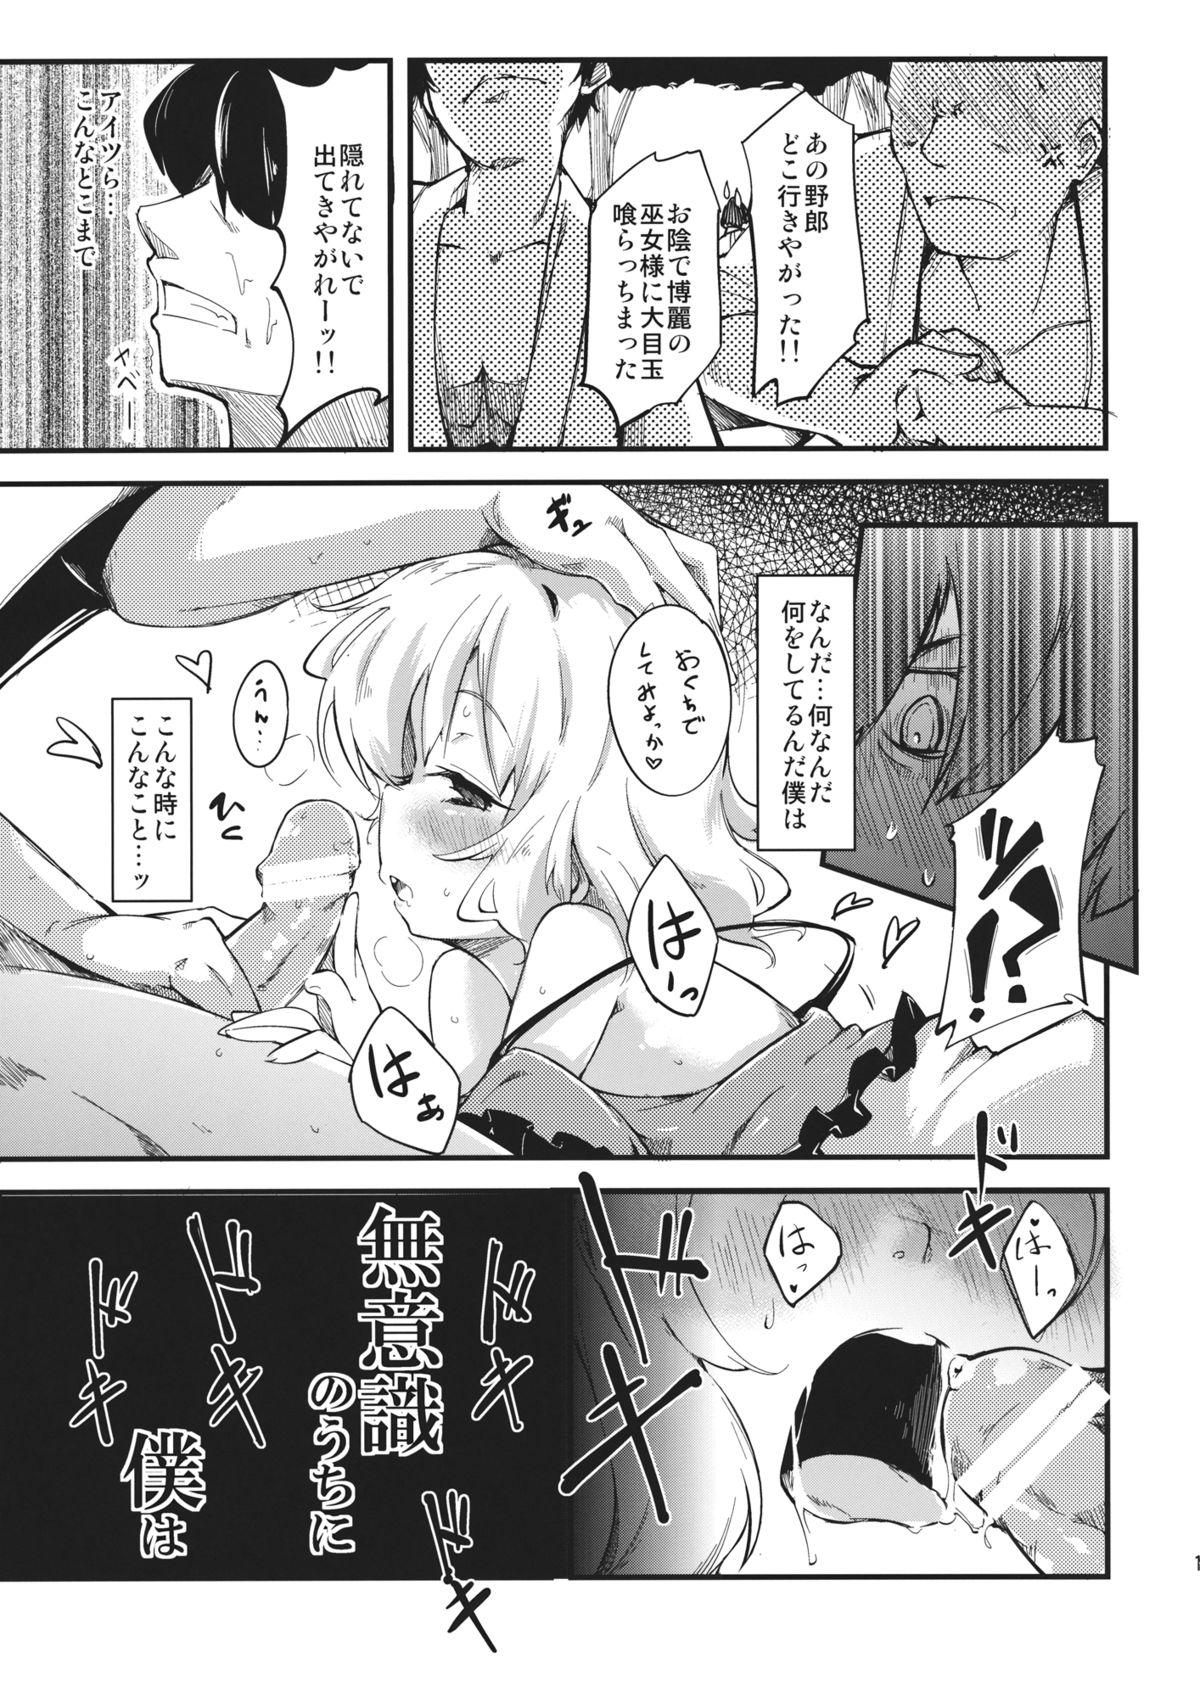 Blow Job Porn subconscious girl - Touhou project Sucking - Page 13